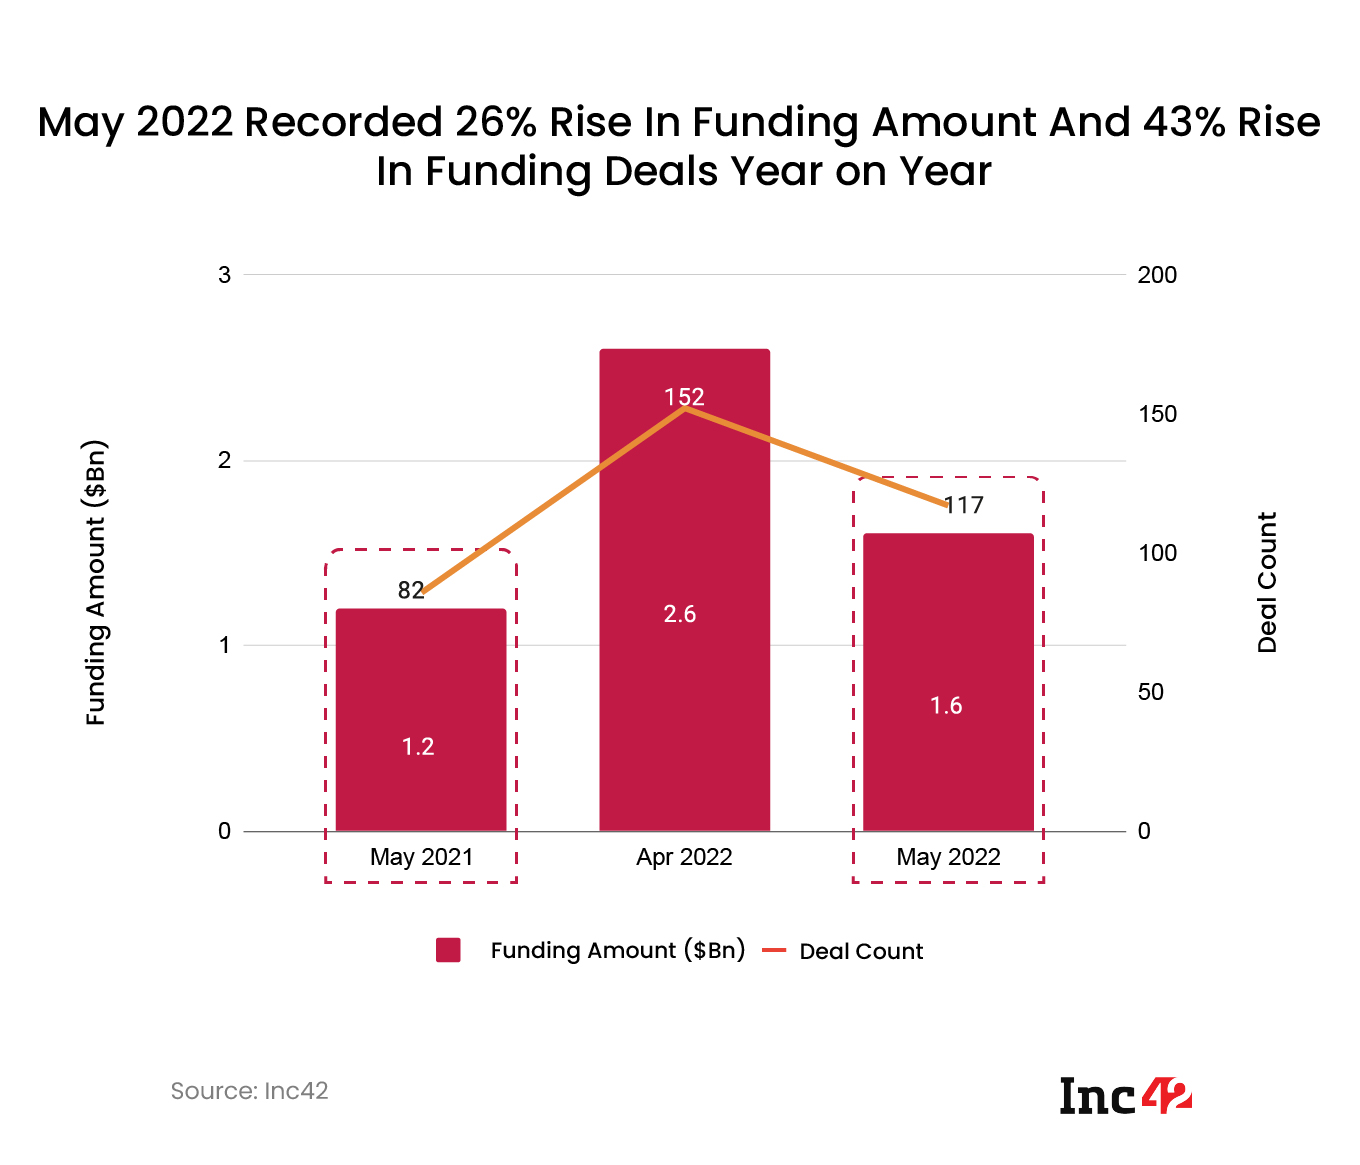 May 2022 recorded 26% rise in funding amount and 43% rise in funding deals year on year